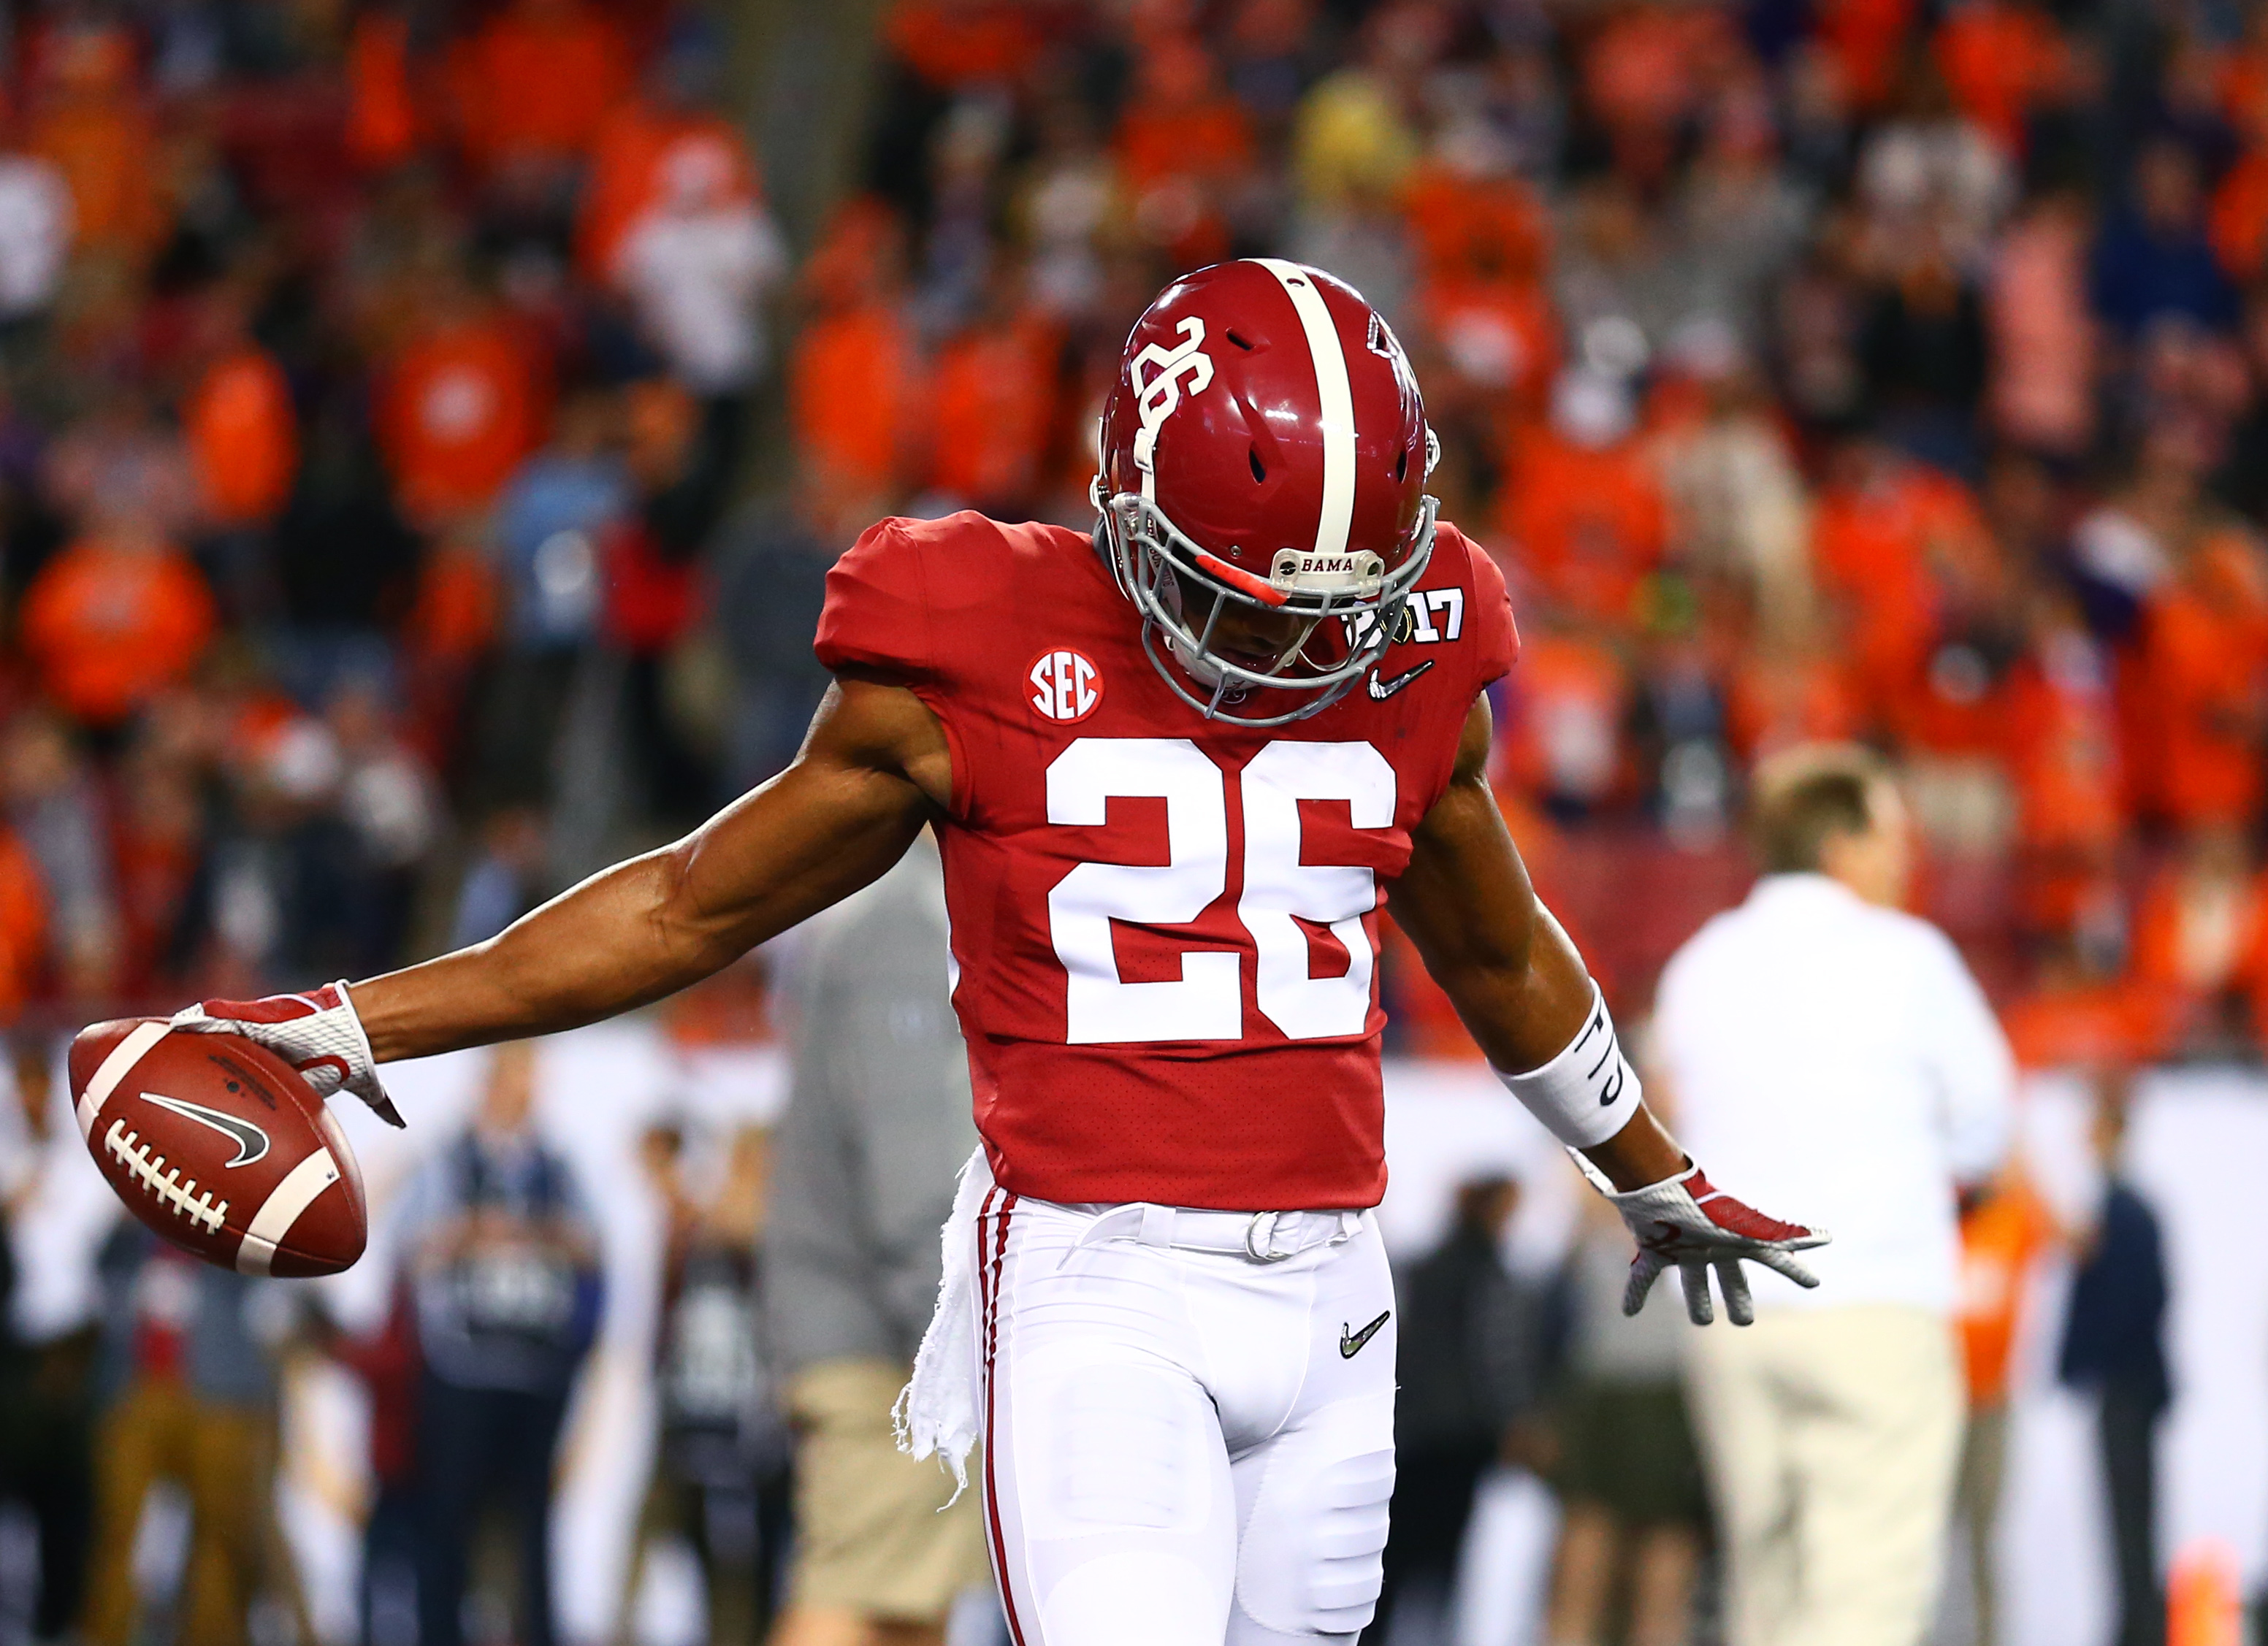 TAMPA, FL - Alabama Crimson Tide defensive back Marlon Humphrey (26) takes a breather between plays during the 2017 College Football Playoff National Championship Game against the Clemson Tigers at Raymond James Stadium.